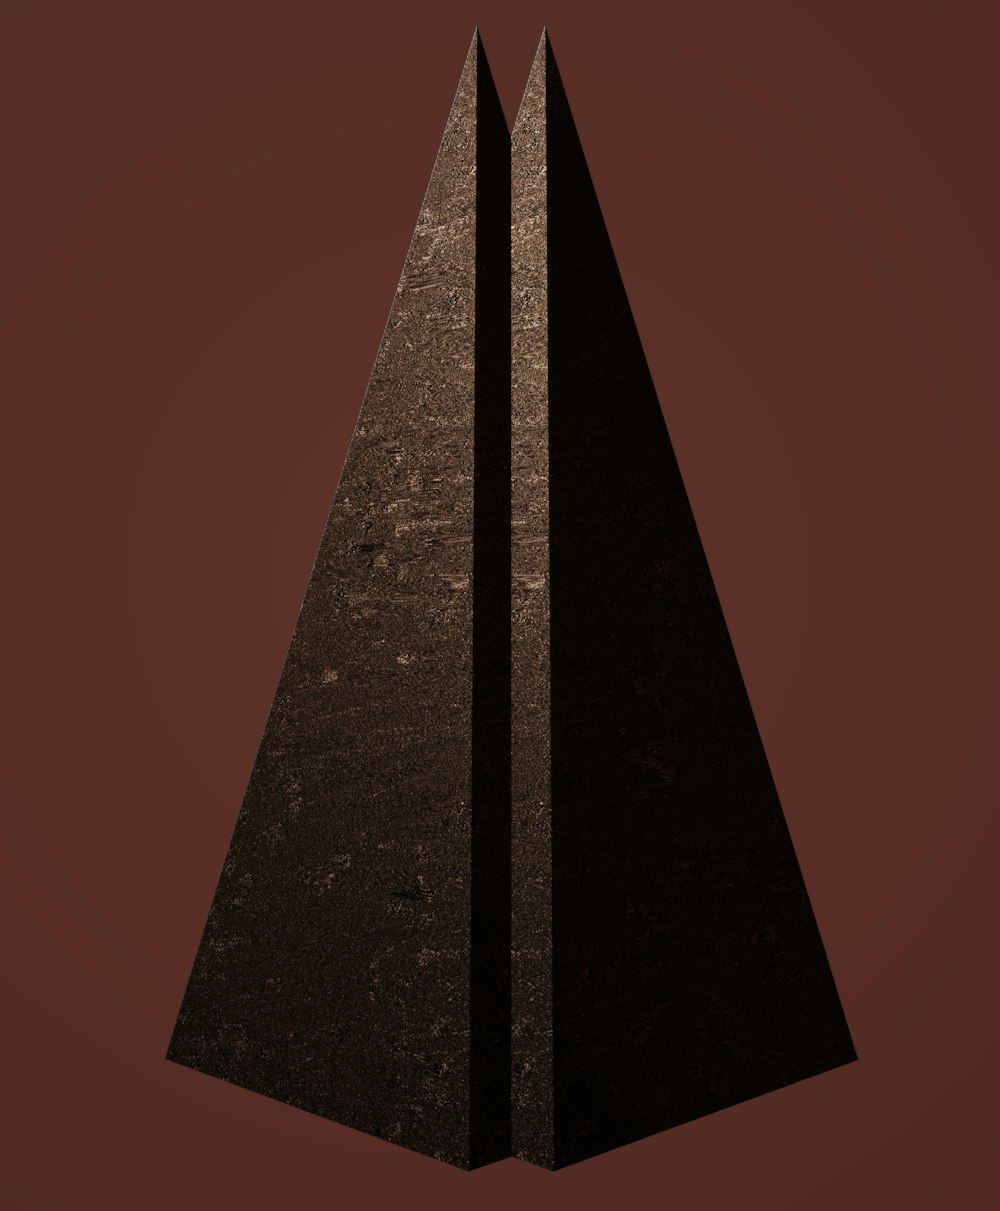 a pair of black triangular shaped objects on a brown background